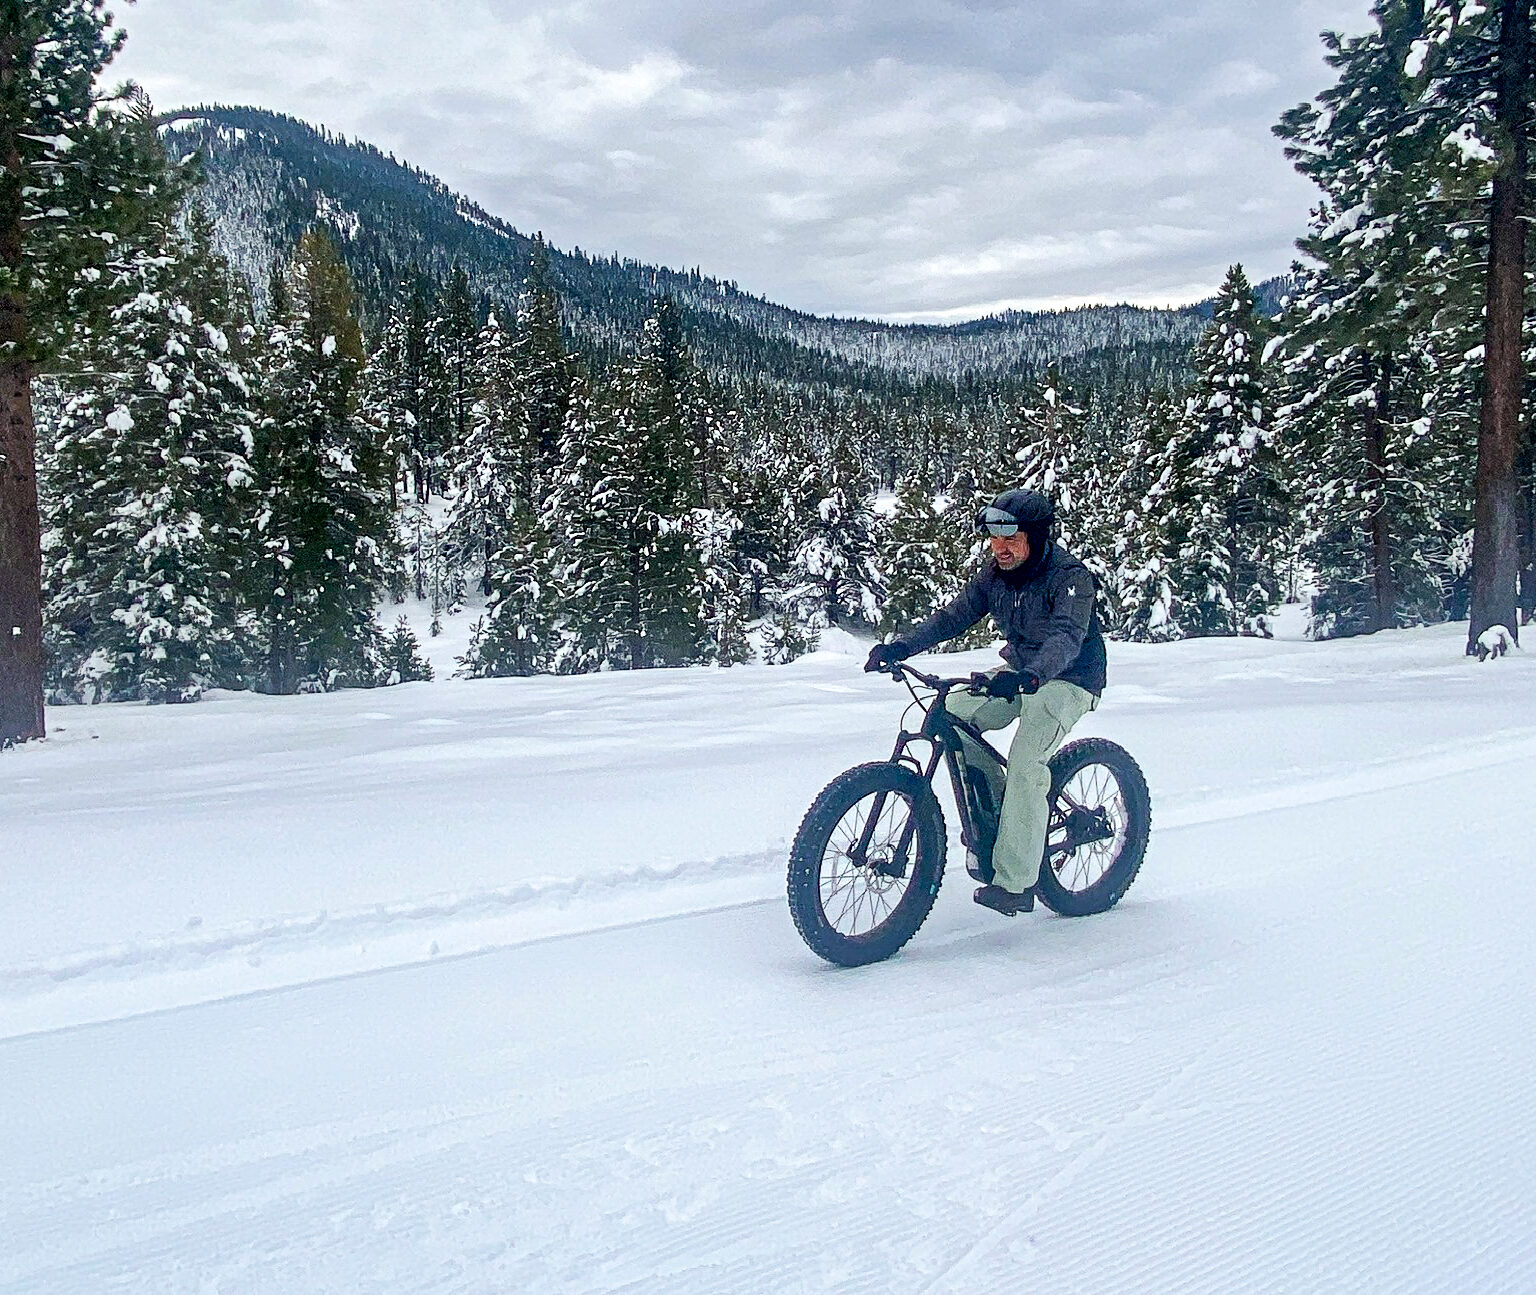 With No Powder In Sight… It’s Time To Go Winter Fat Biking